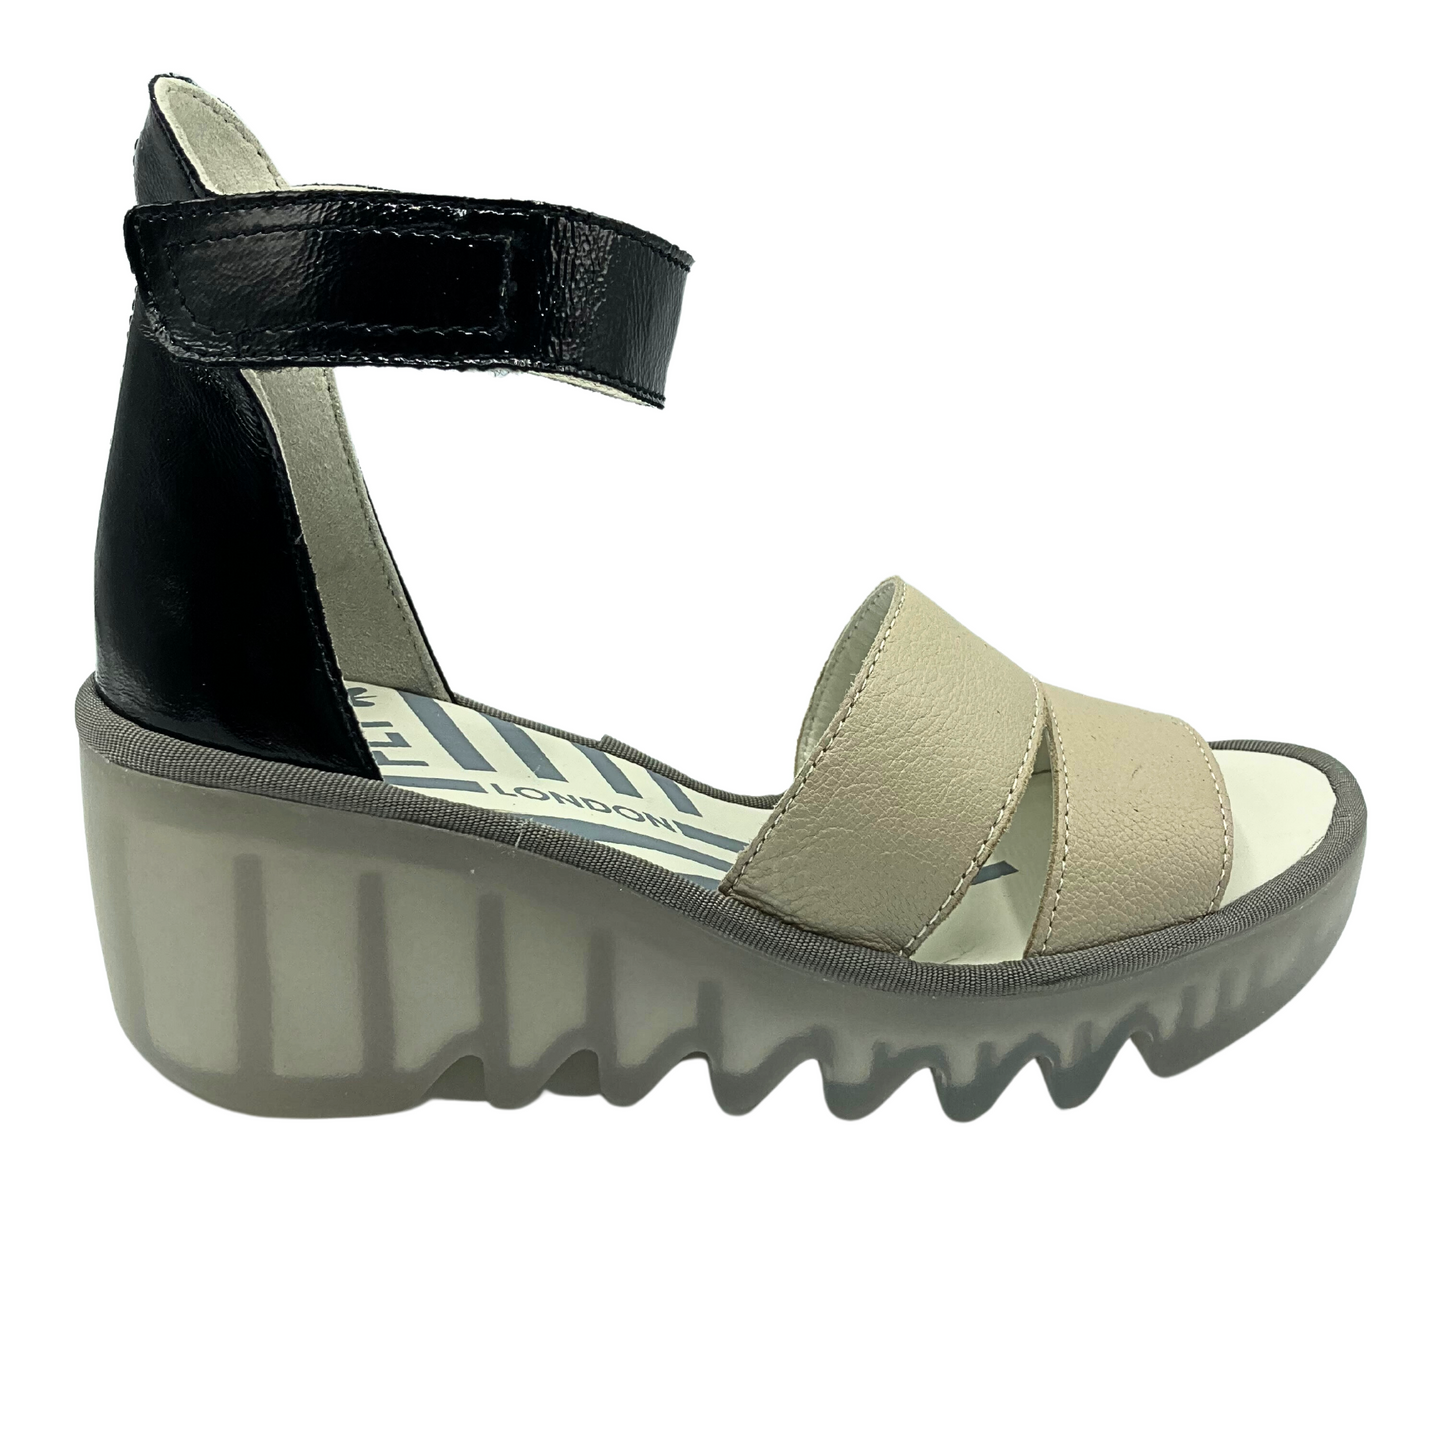 Outside view of a lower wedge Fly London sandal.  Two-tonw with black heel cup and ankle strap and cream straps in front.